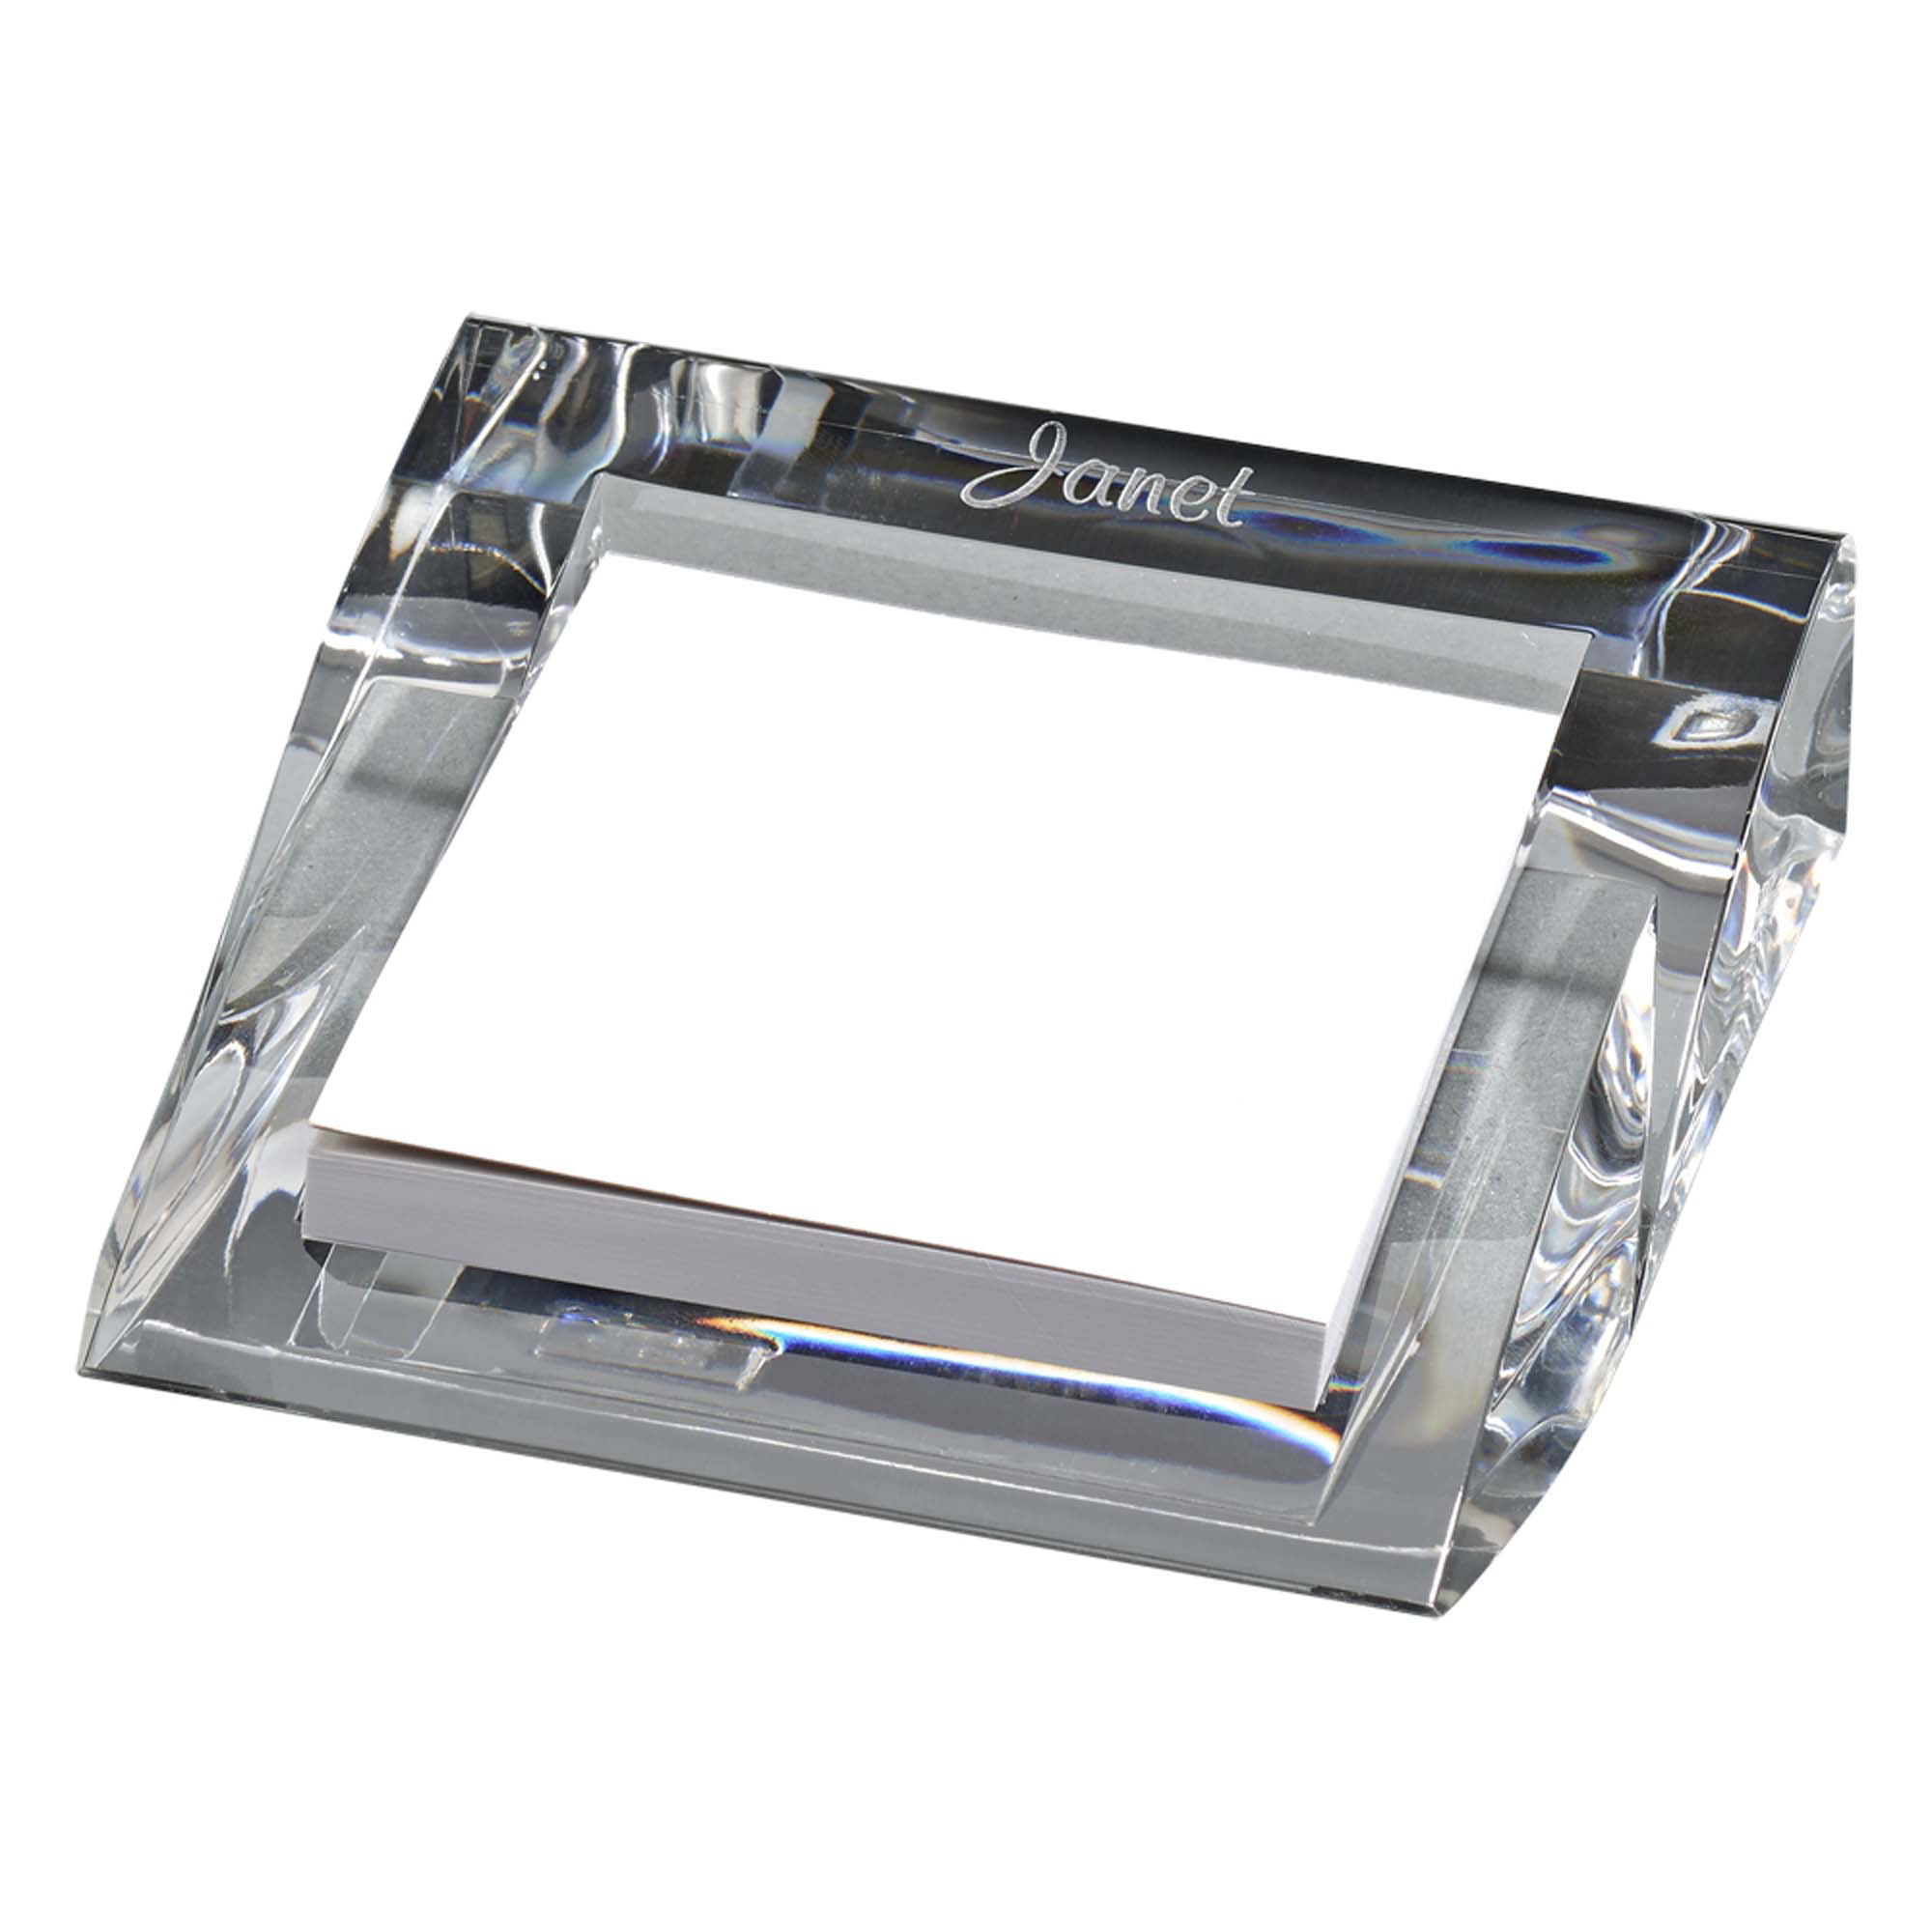 002721 4.25 X 4.25 In. Clearylic Pad Or Paper Holder - Silver